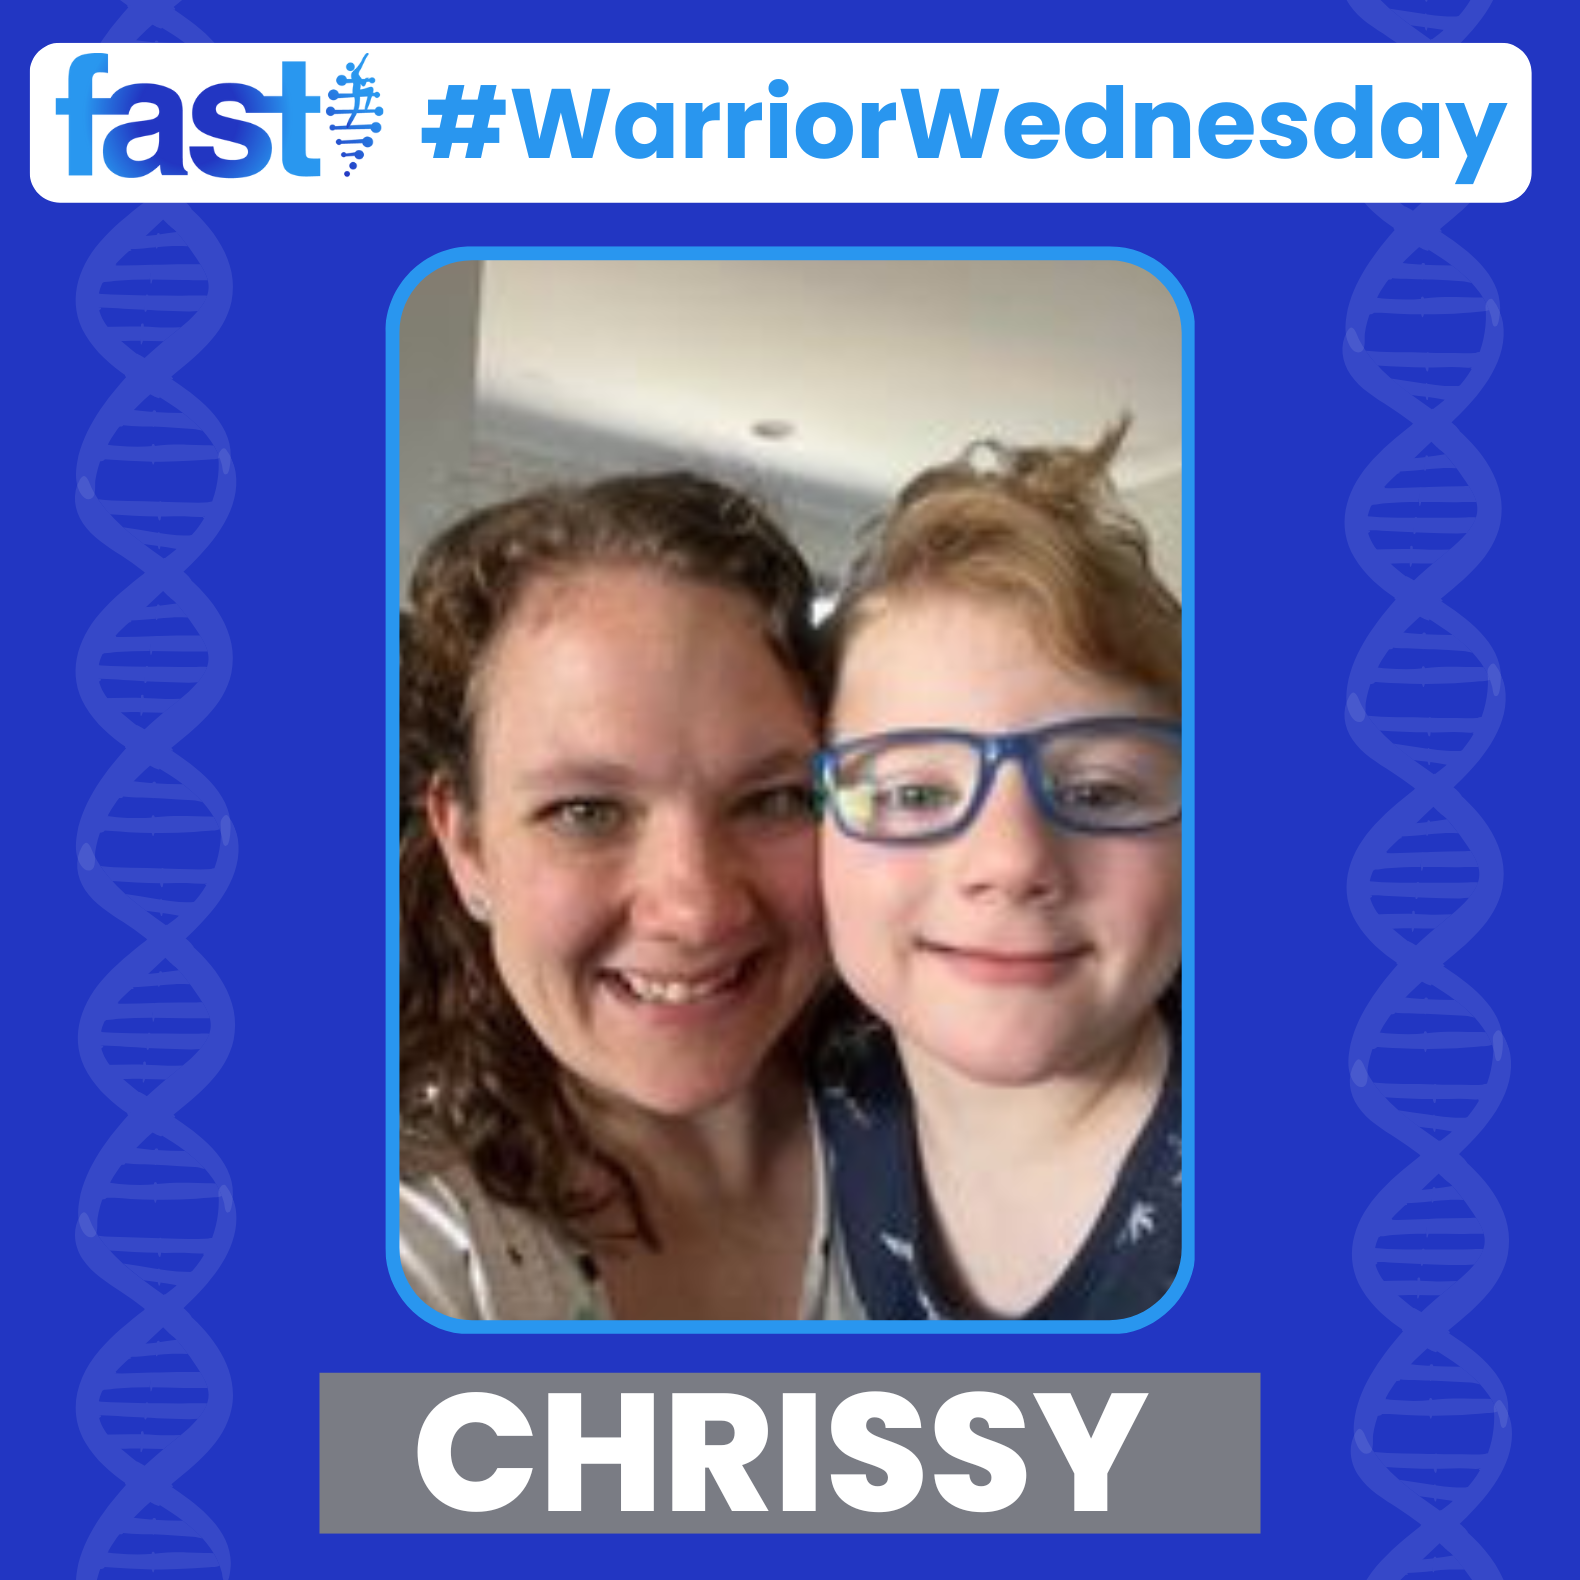 FAST #WarriorWednesday: Chrissy, with a photo of Chrissy and her son Elliot smiling